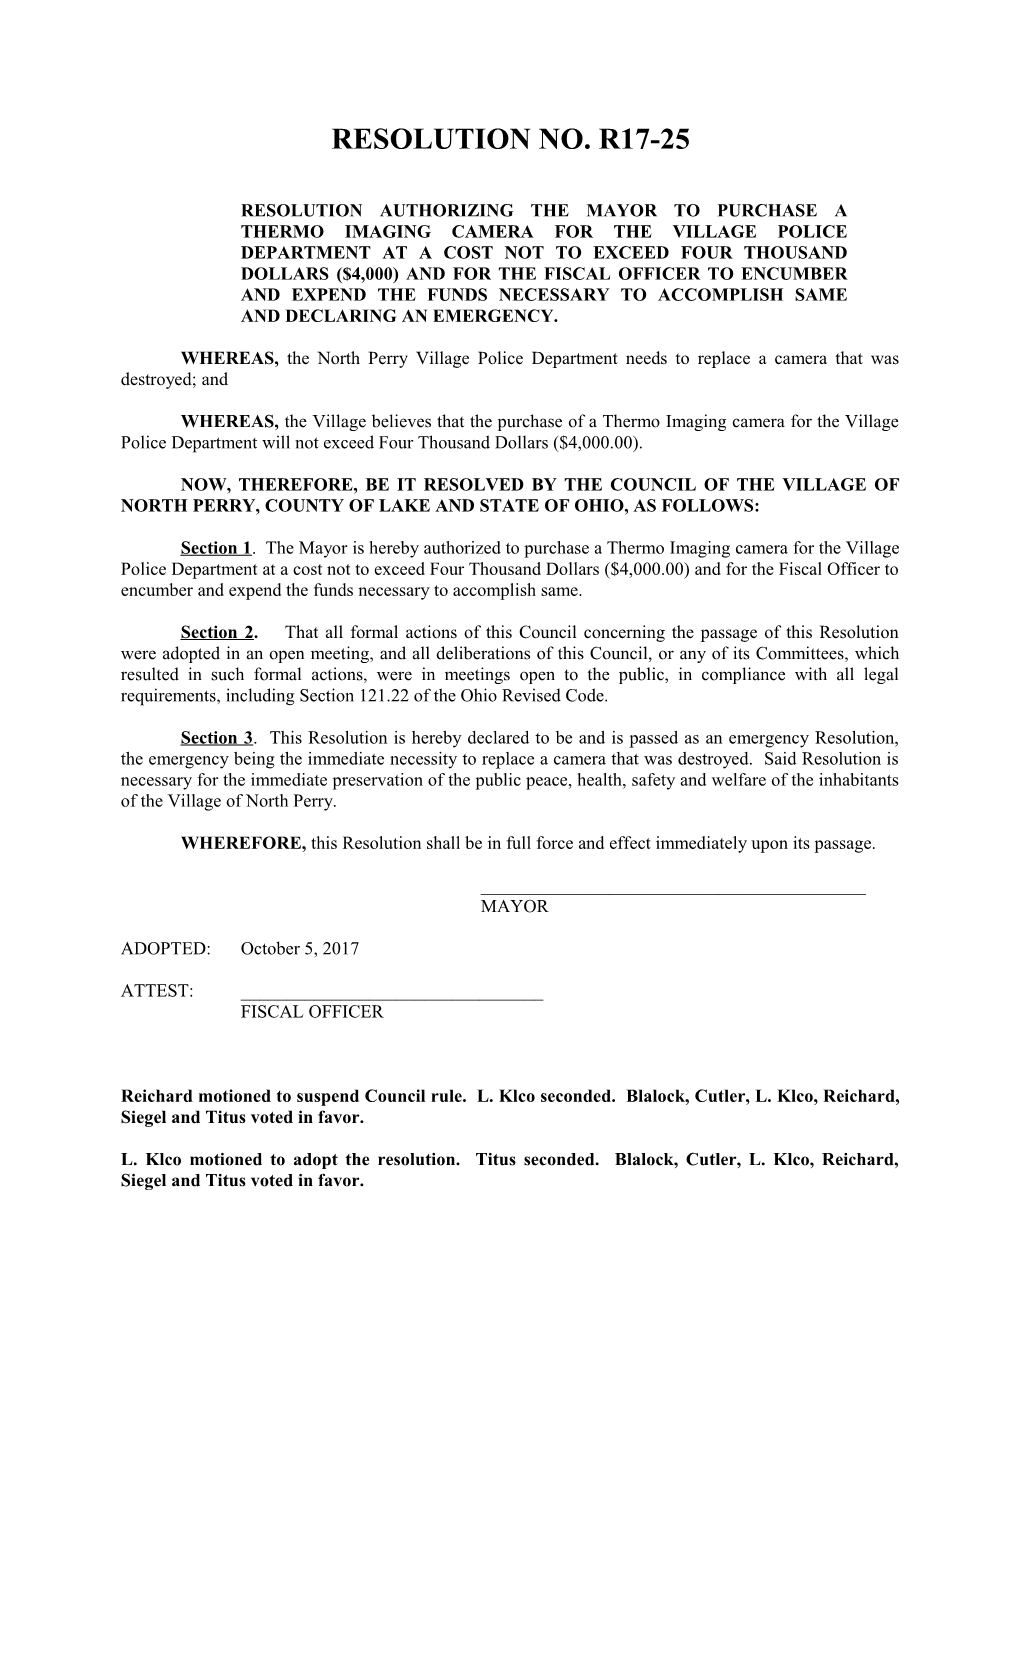 Resolution Authorizing the Mayor to Purchase a Thermo Imaging Camera for the Village Police